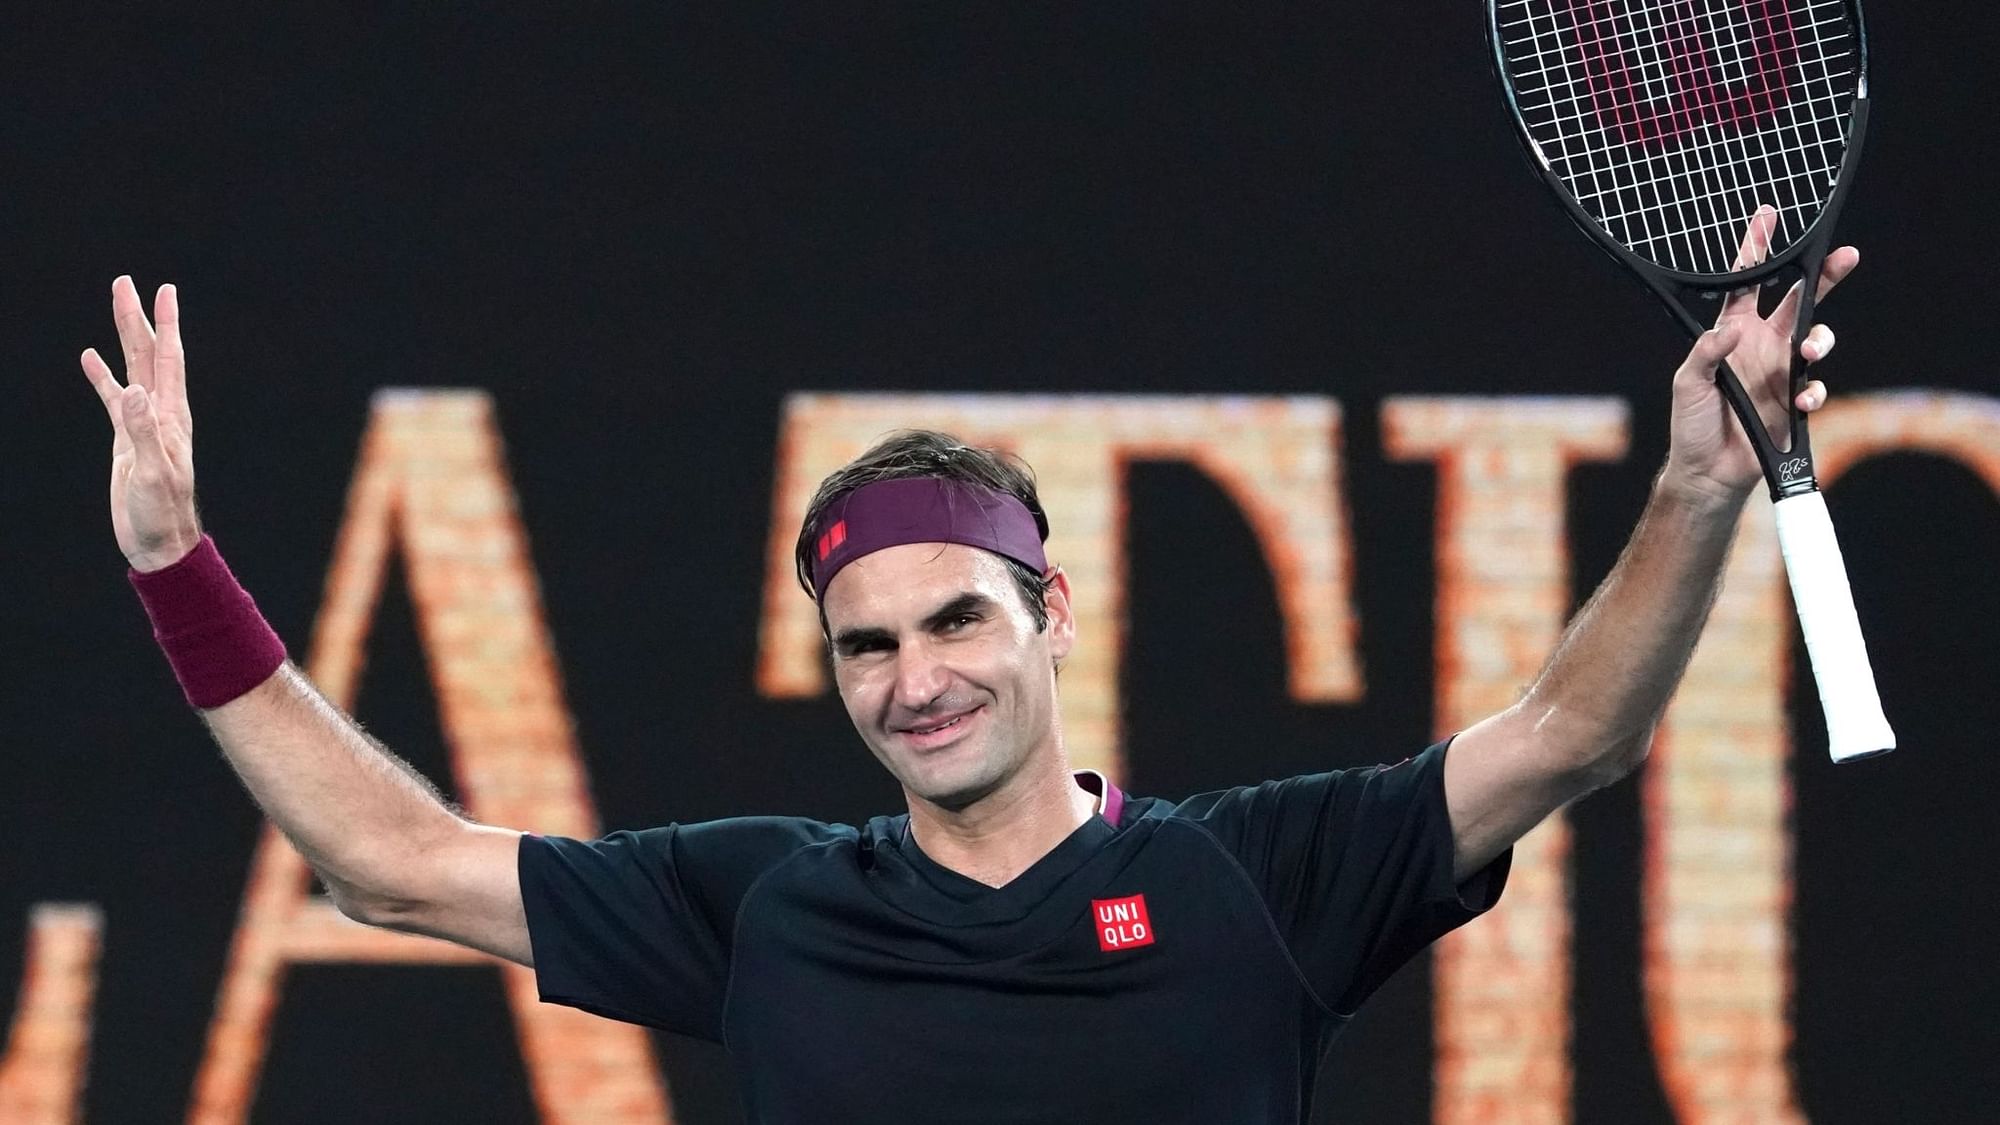 Ruthless Swiss master Roger Federer on Wednesday, 22 January, had said he had “plenty left in the tank” as he kept intact his 20-year record of reaching at least the third round of the Australian Open after crushing Serb Filip Krajinovic.